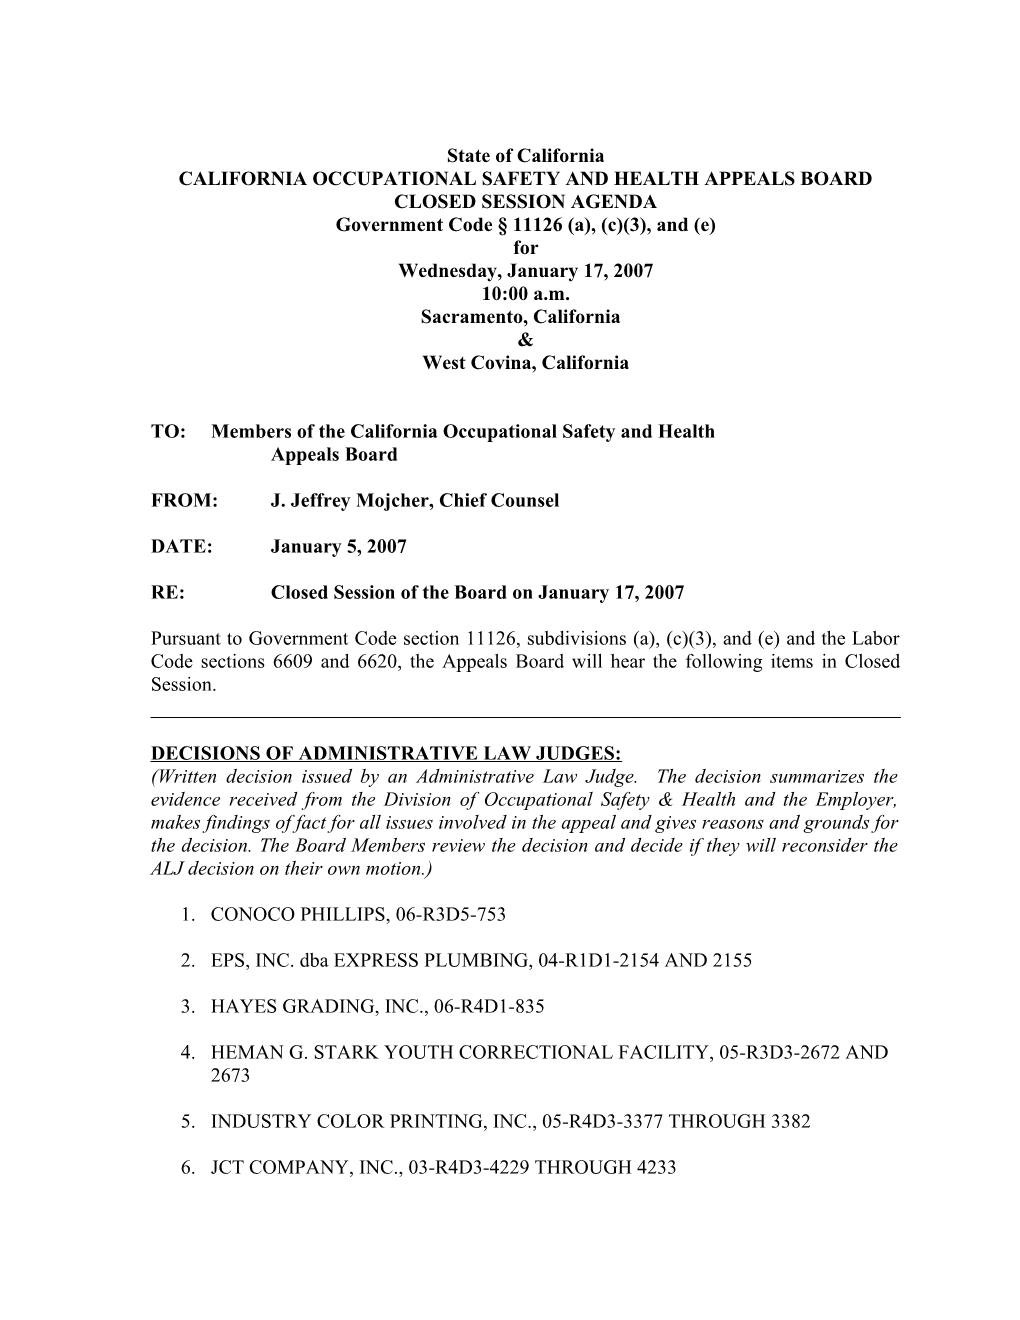 California Occupational Safety & Health Appeals Board s11